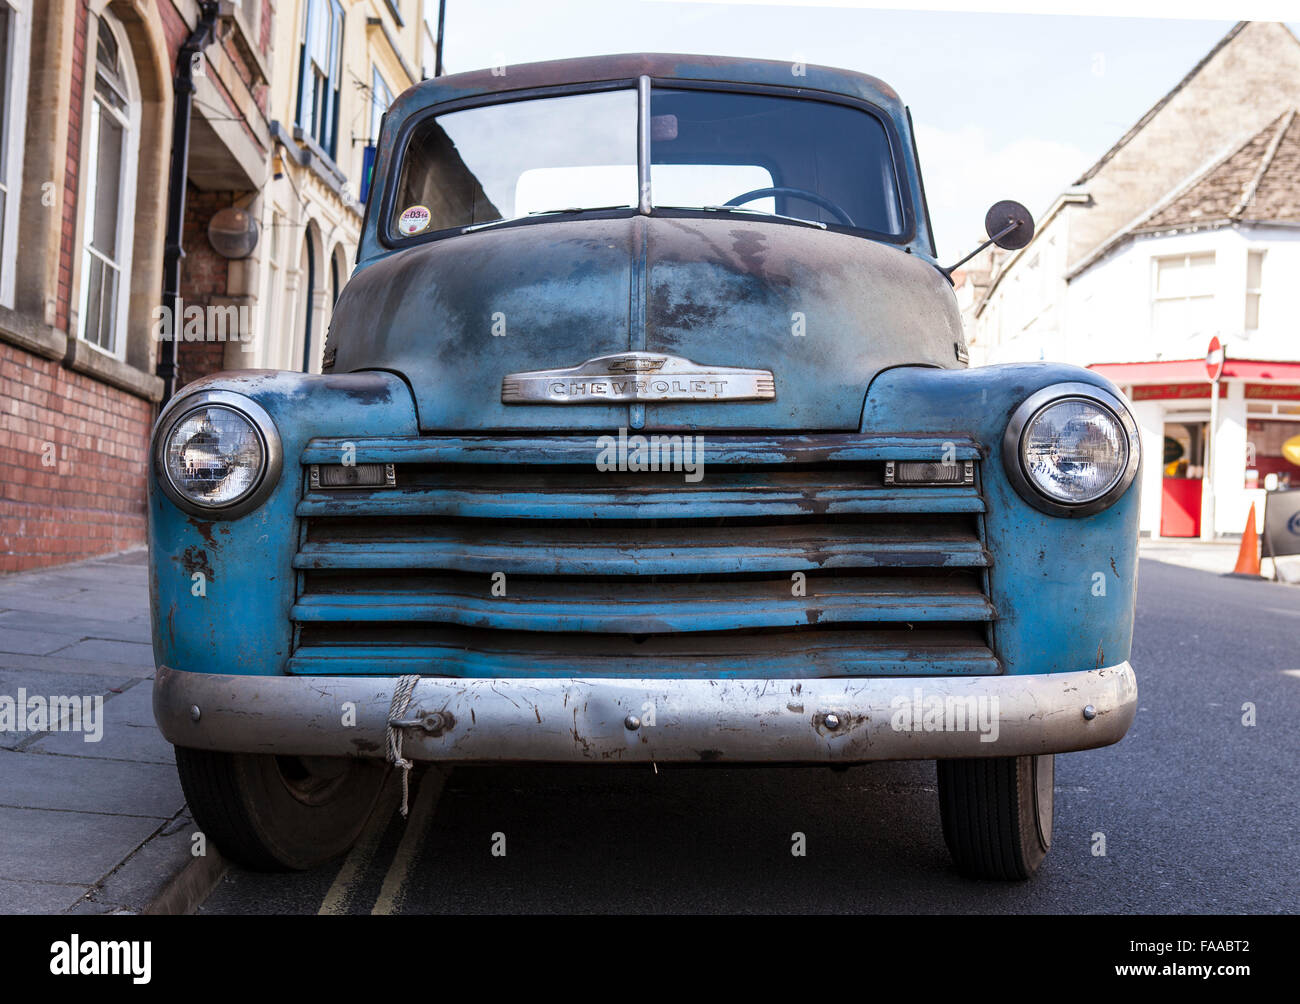 Front View of a Blue 1950 Chevrolet Pickup Truck Stock Photo